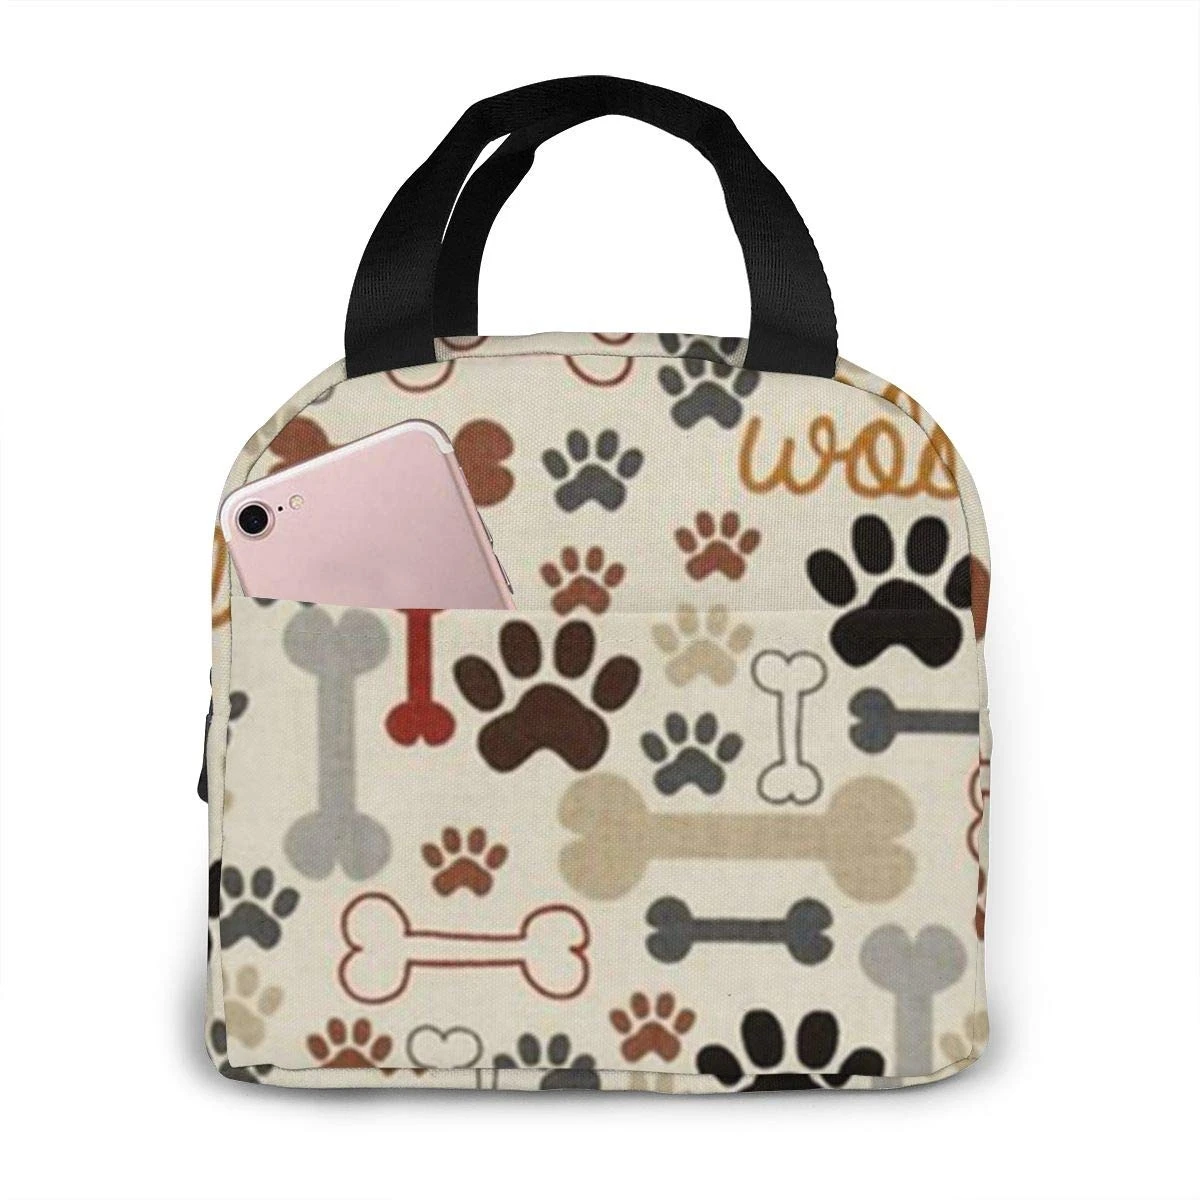 

Dog Bones Paw Prints Lunch Bag for Women Stylish Lunch Tote Bag Insulated Lunch Bag Lunch Box Insulated Lunch Container